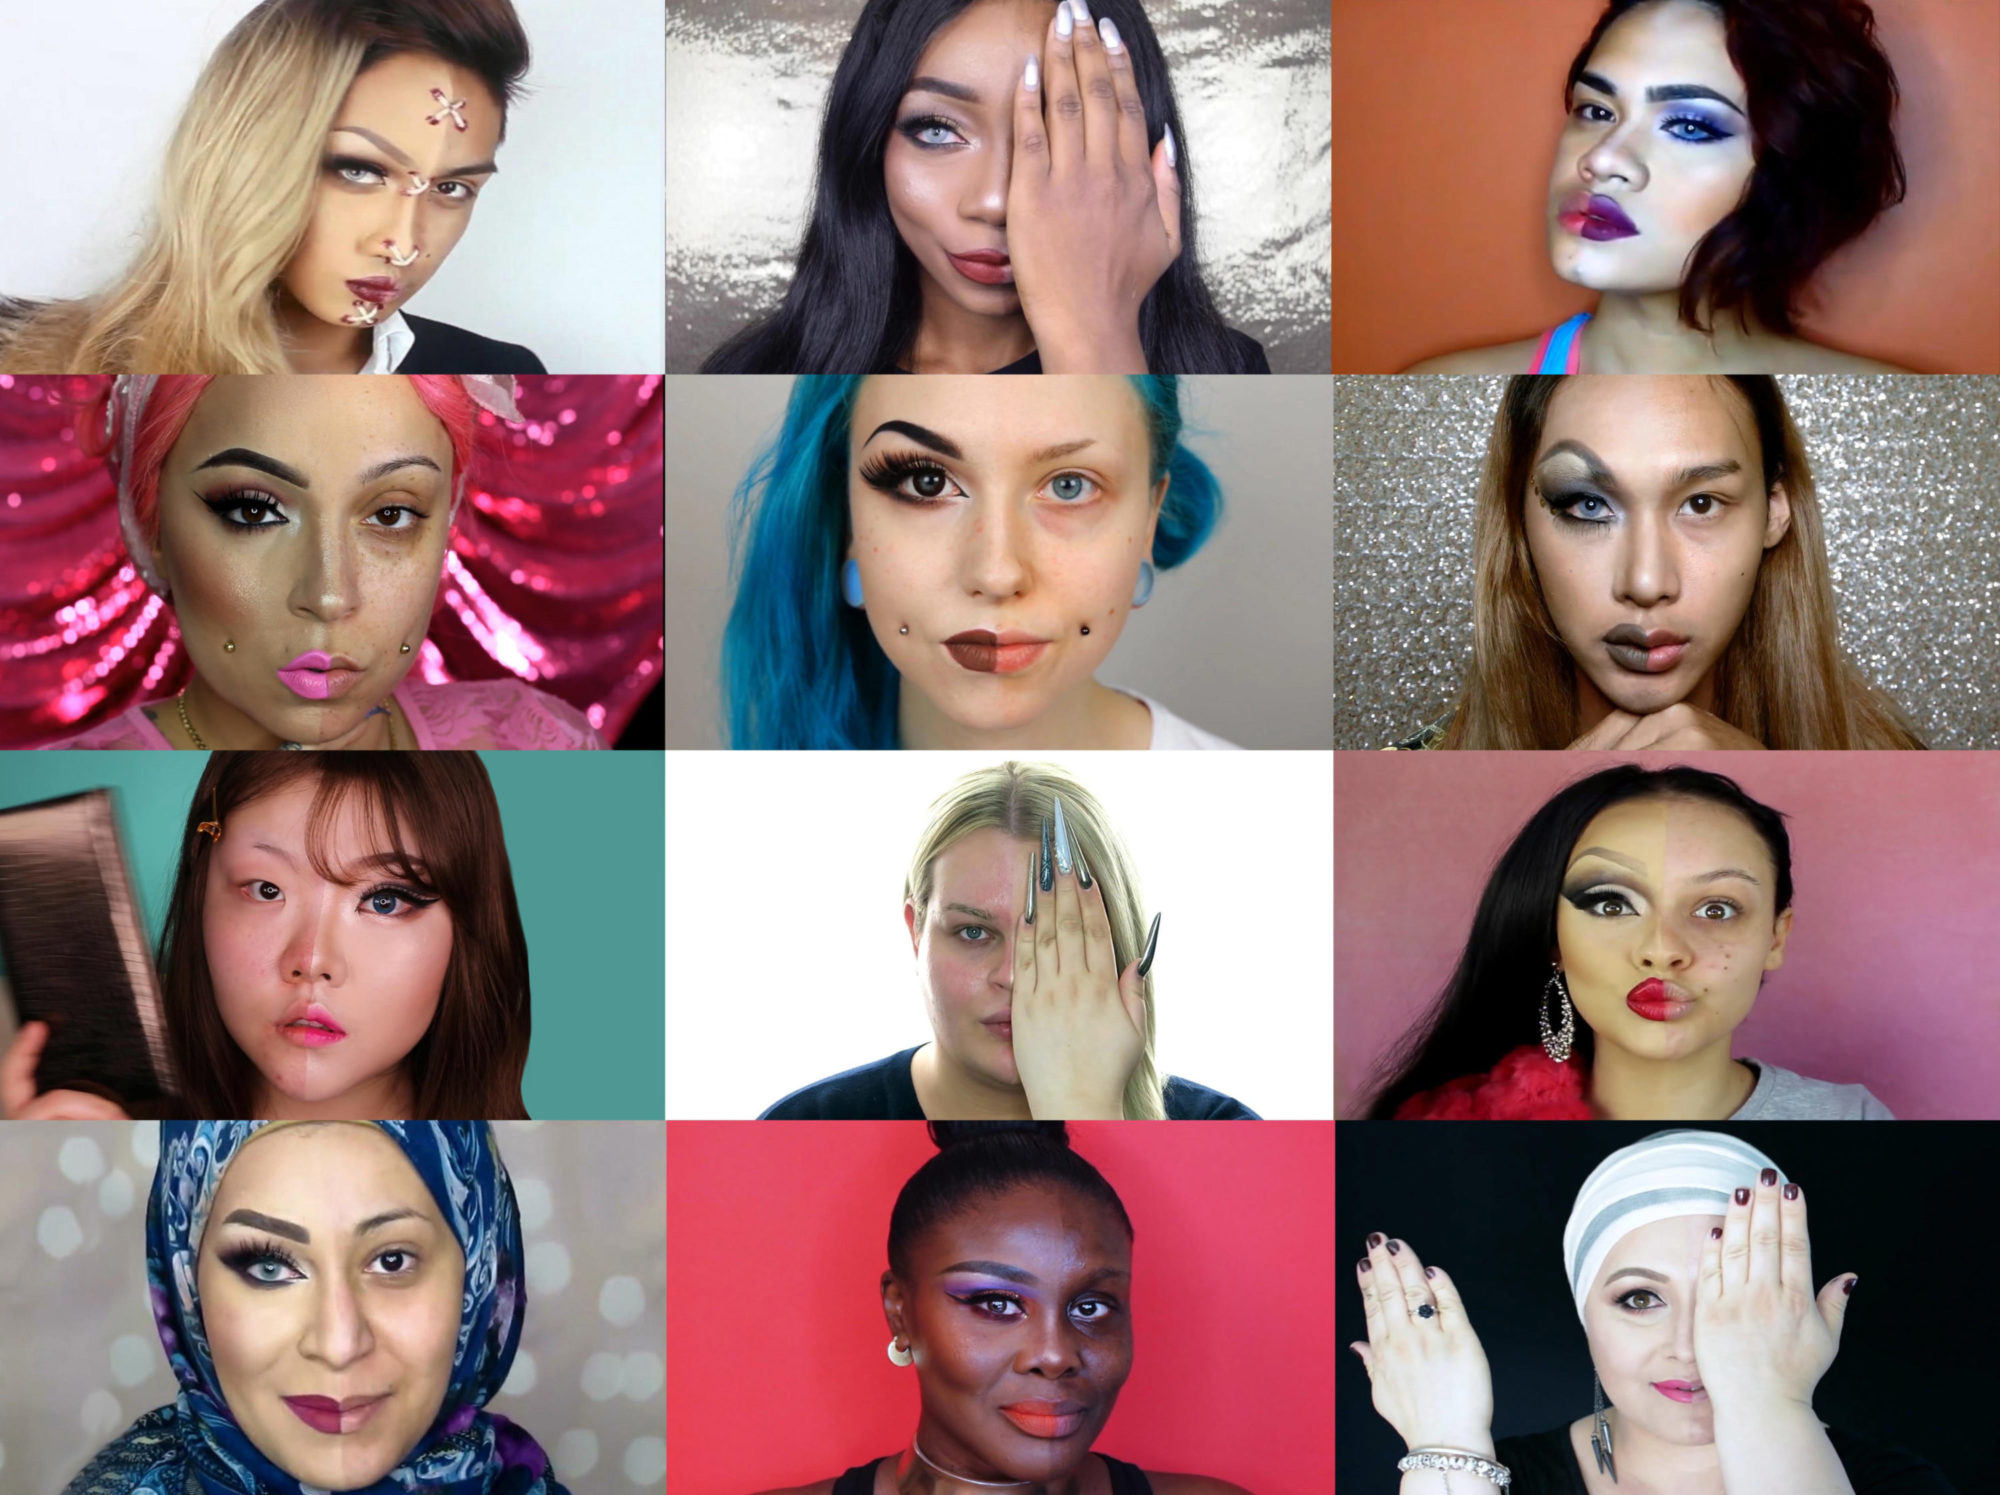 twelve images of individuals with heavy makeup on only one side of their face